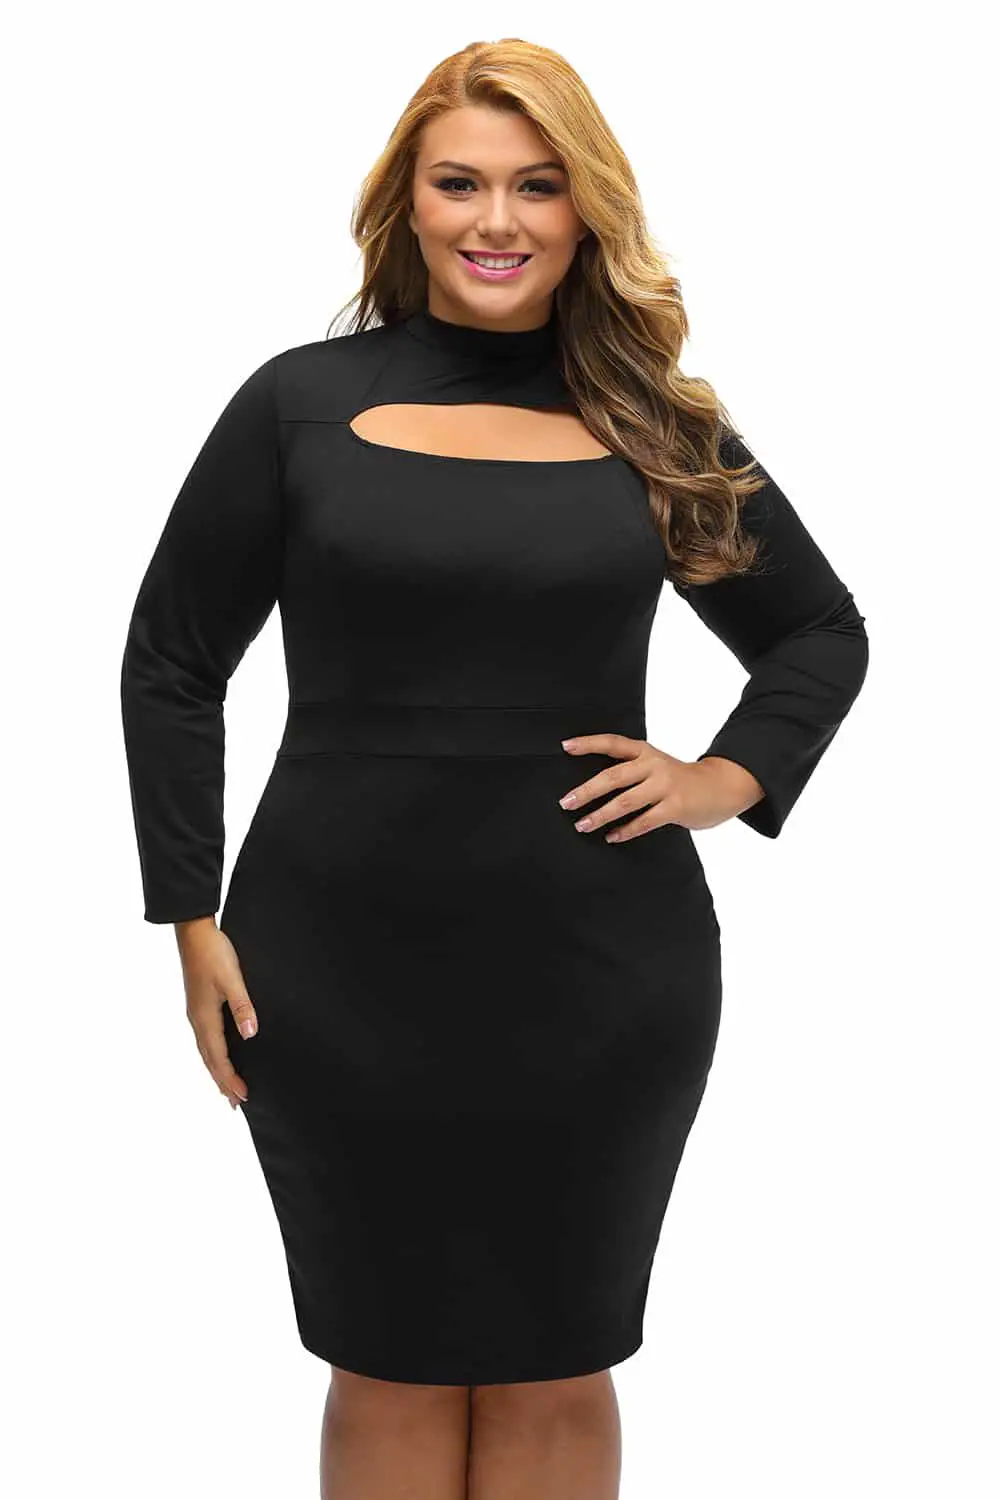 Long bodycon dresses plus size for church online from